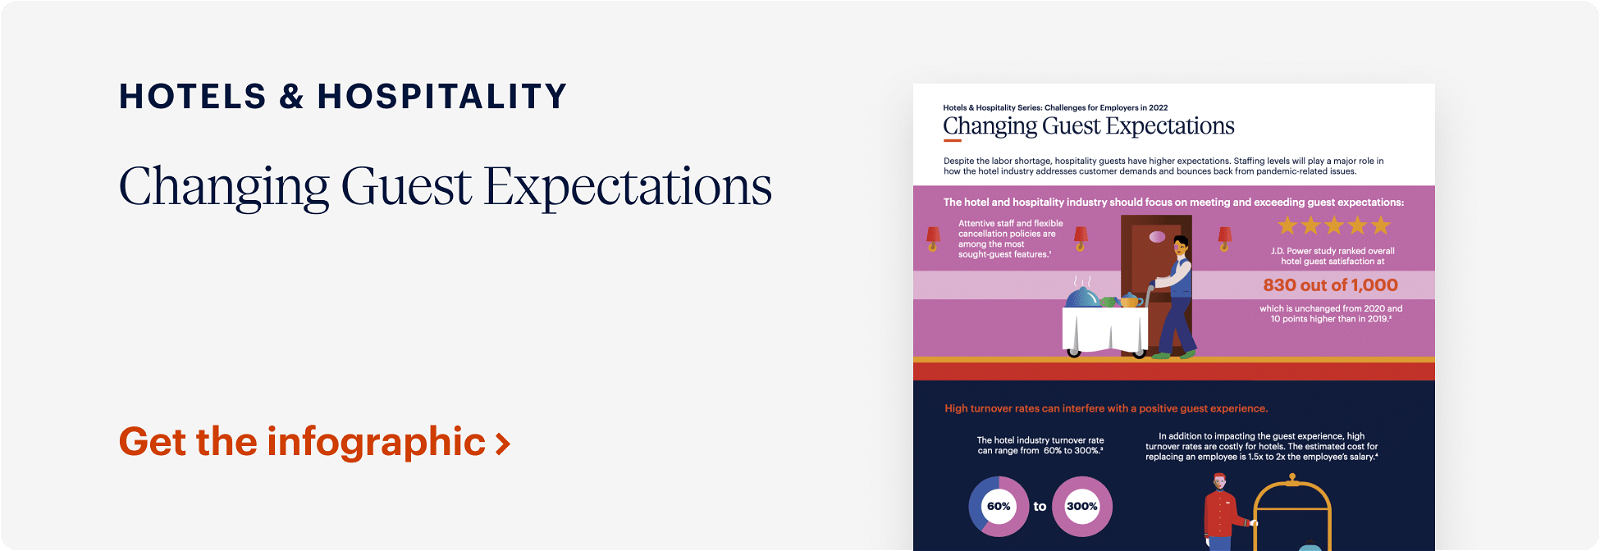 Infographic for the Hotels & Hospitality Industry titled "Changing Guest Expectations." It includes statistics about guest satisfaction, a graphic of a hotel employee with a cart, and performance ratings. A call-to-action reads, "Get the infographic." The background is white with purple and red accents.